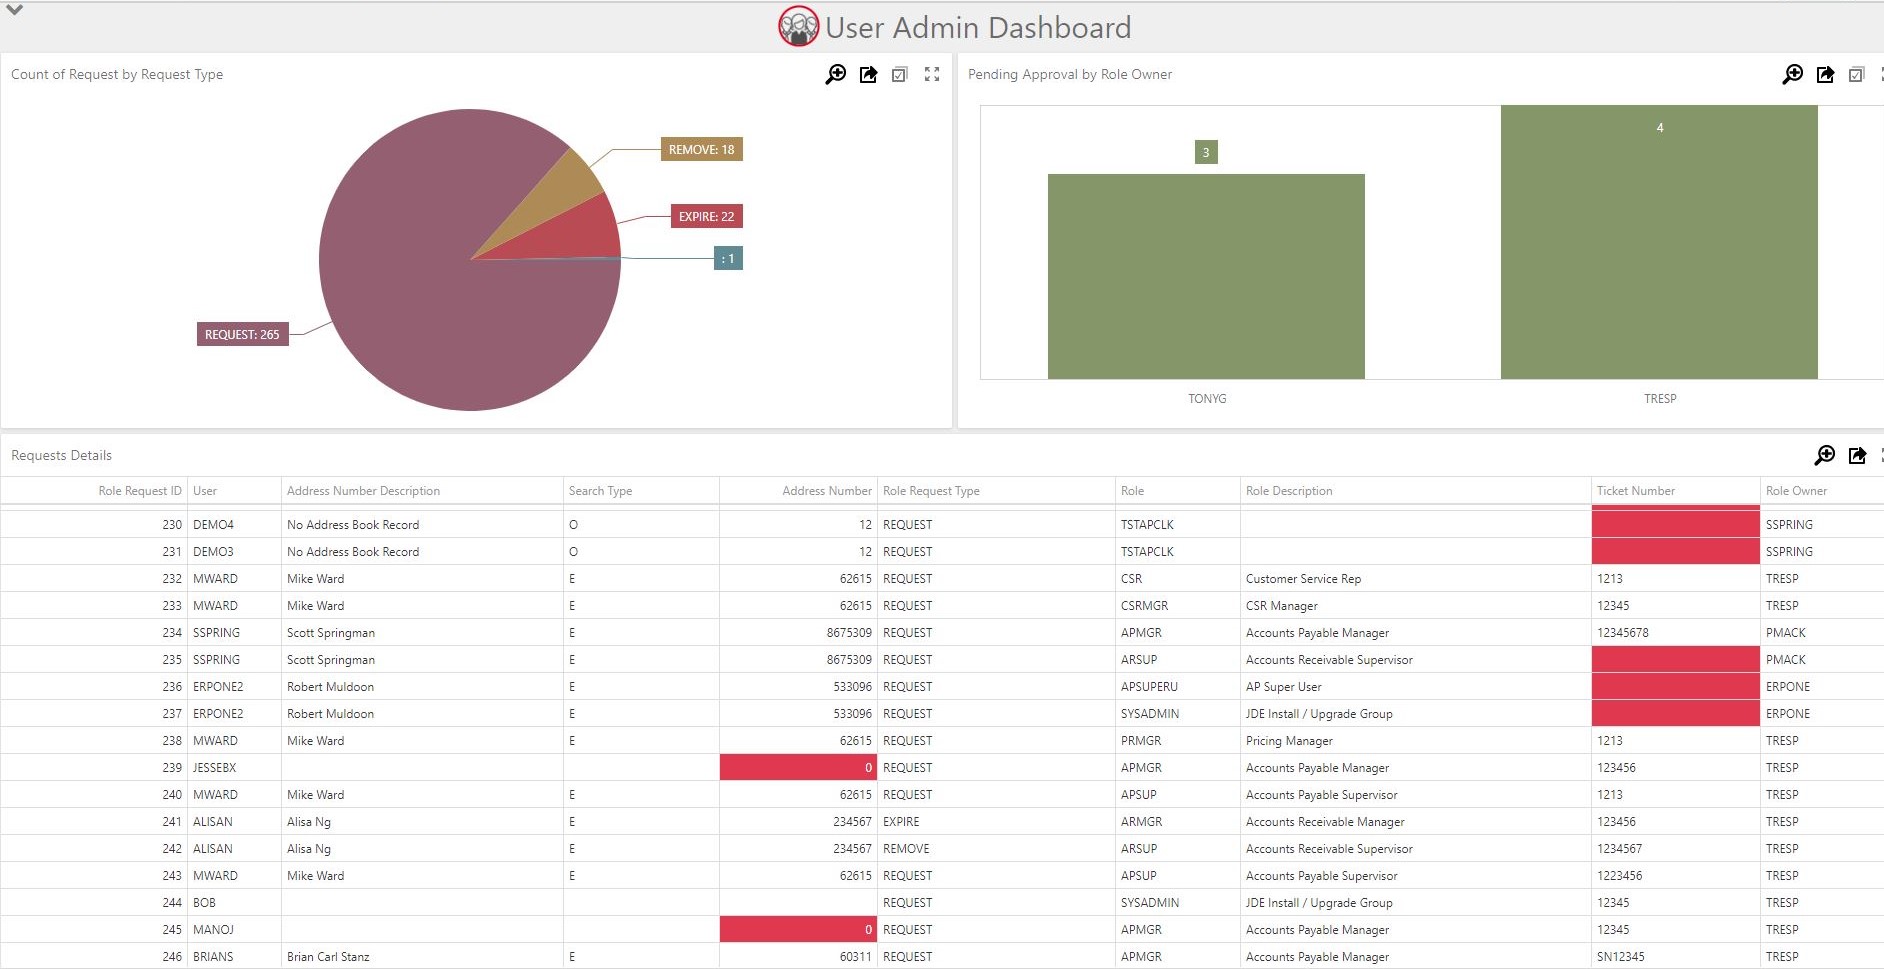 User Admin Manager Dashboard in RN4QS